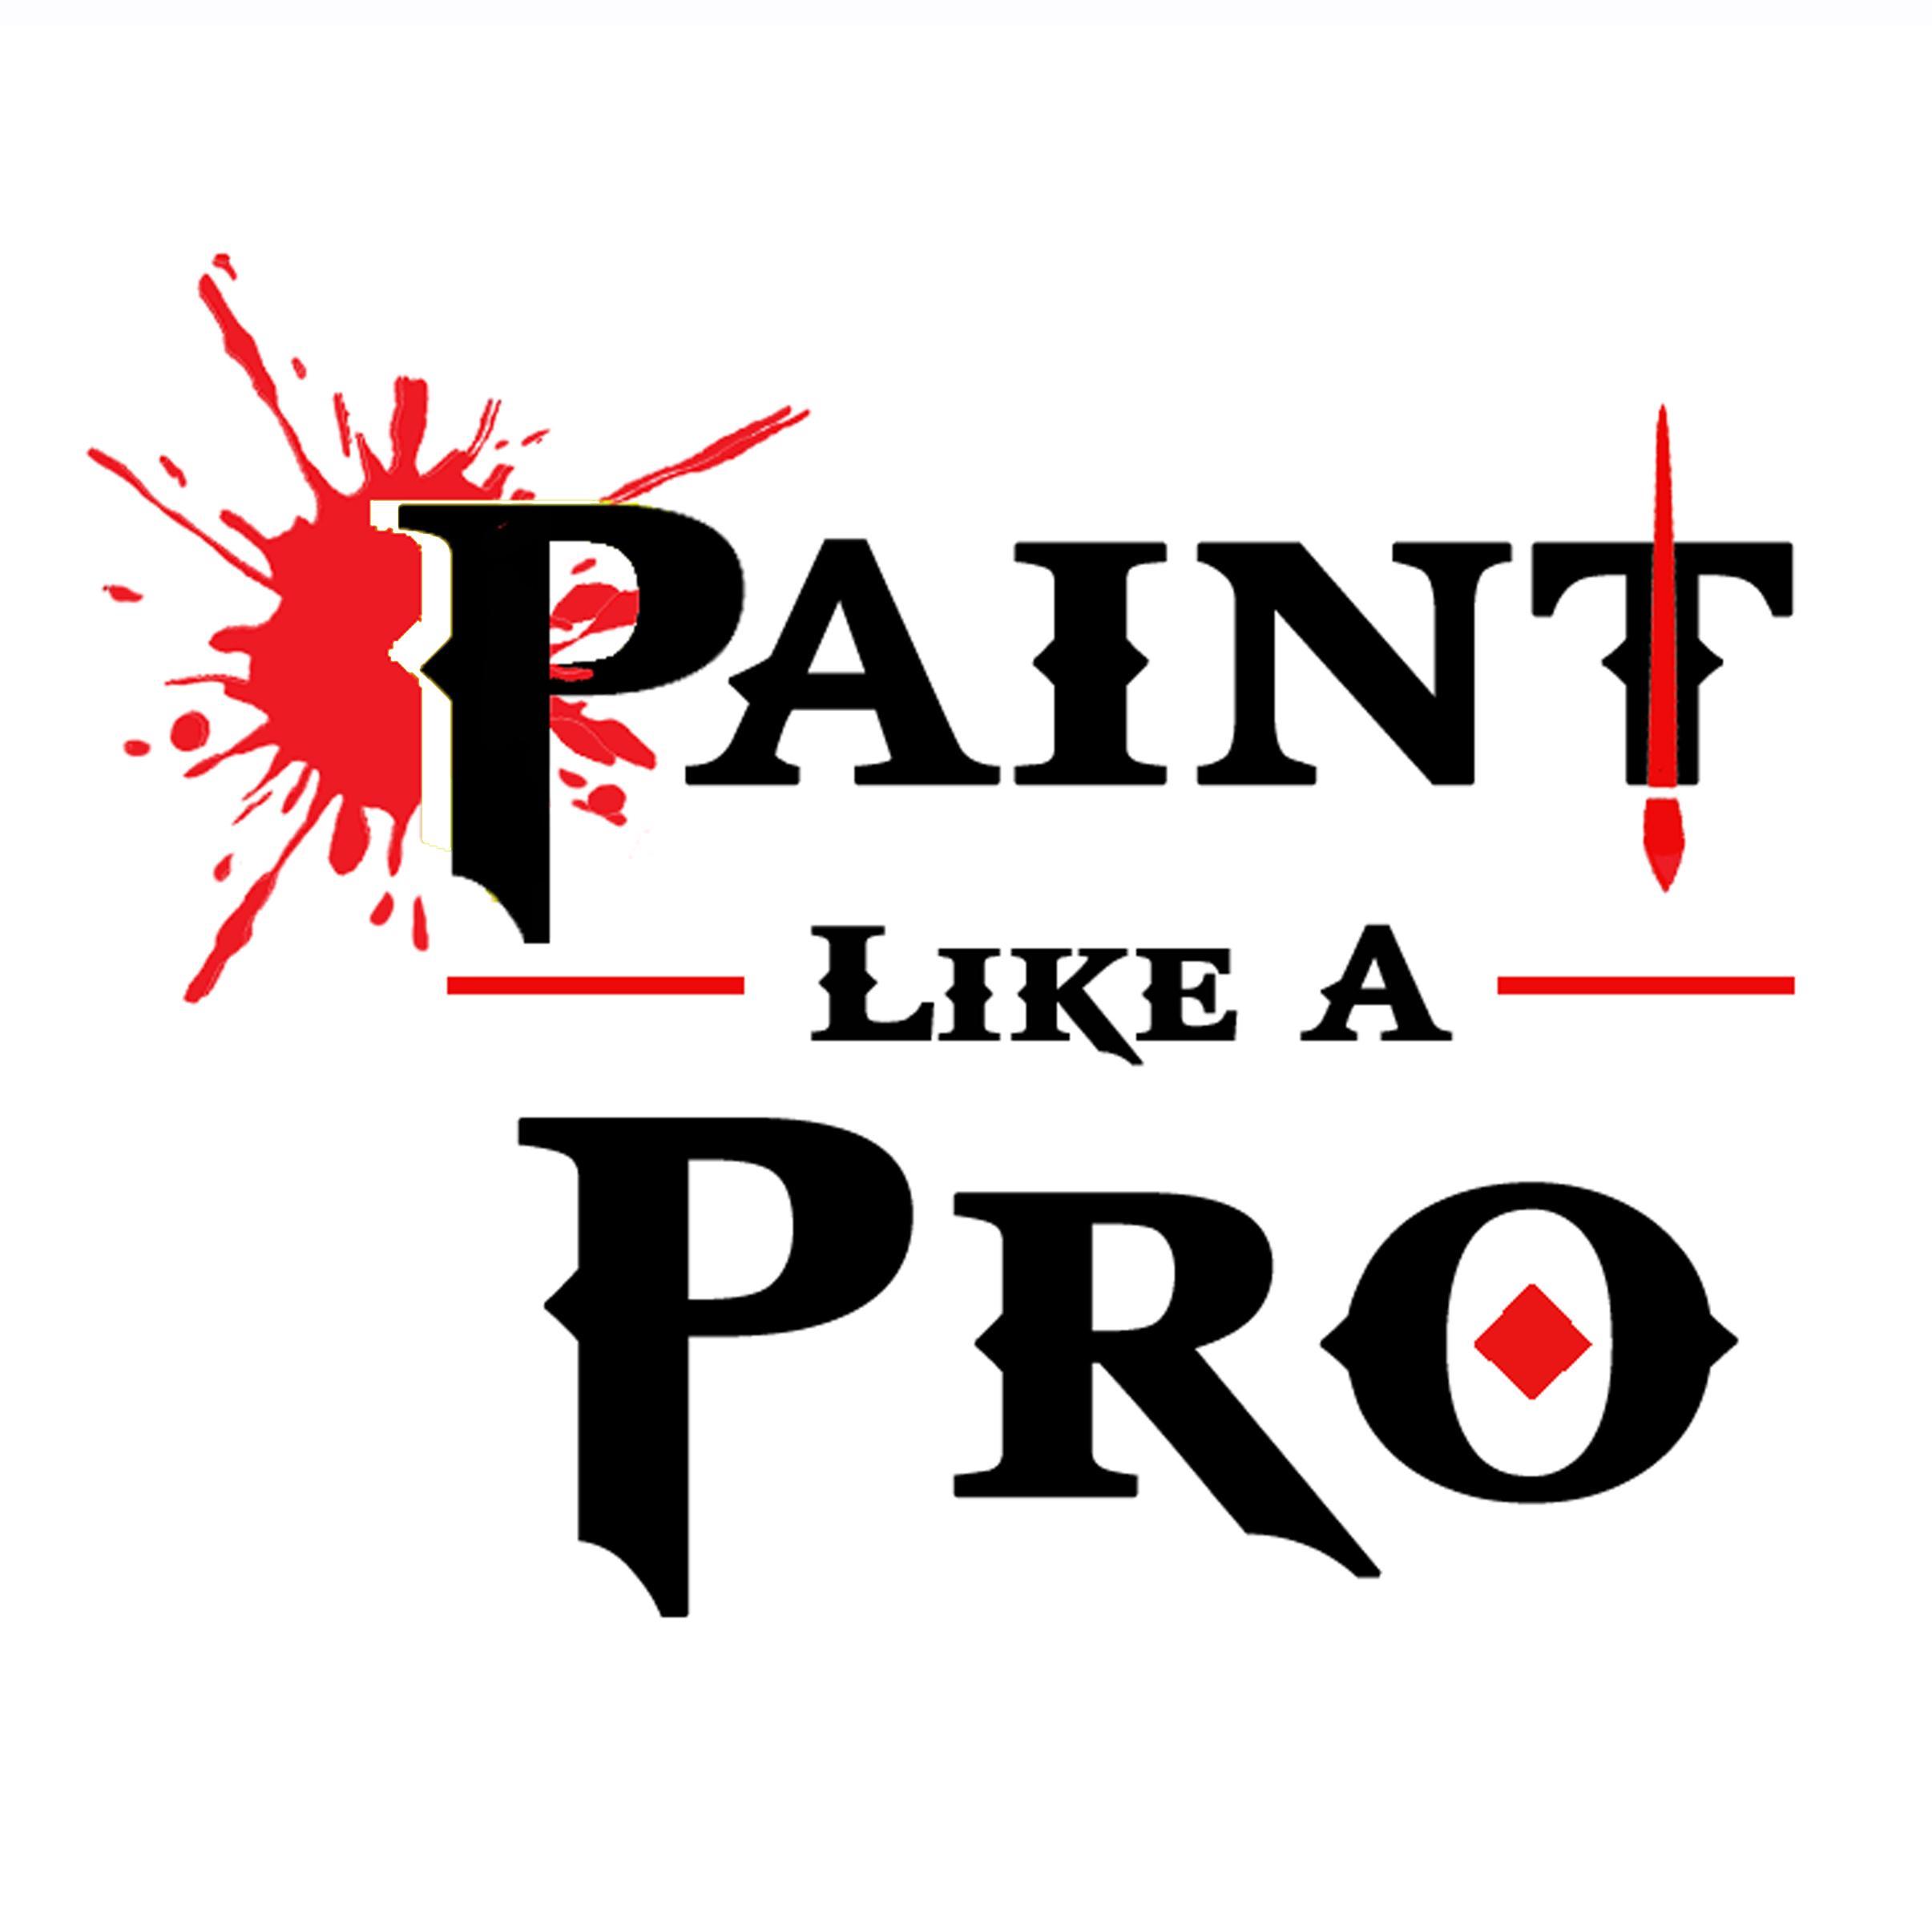 Makeup company that provides quality, vegan body art products. ProAiir has been used by artists all over the world in competitions, movies, and more!